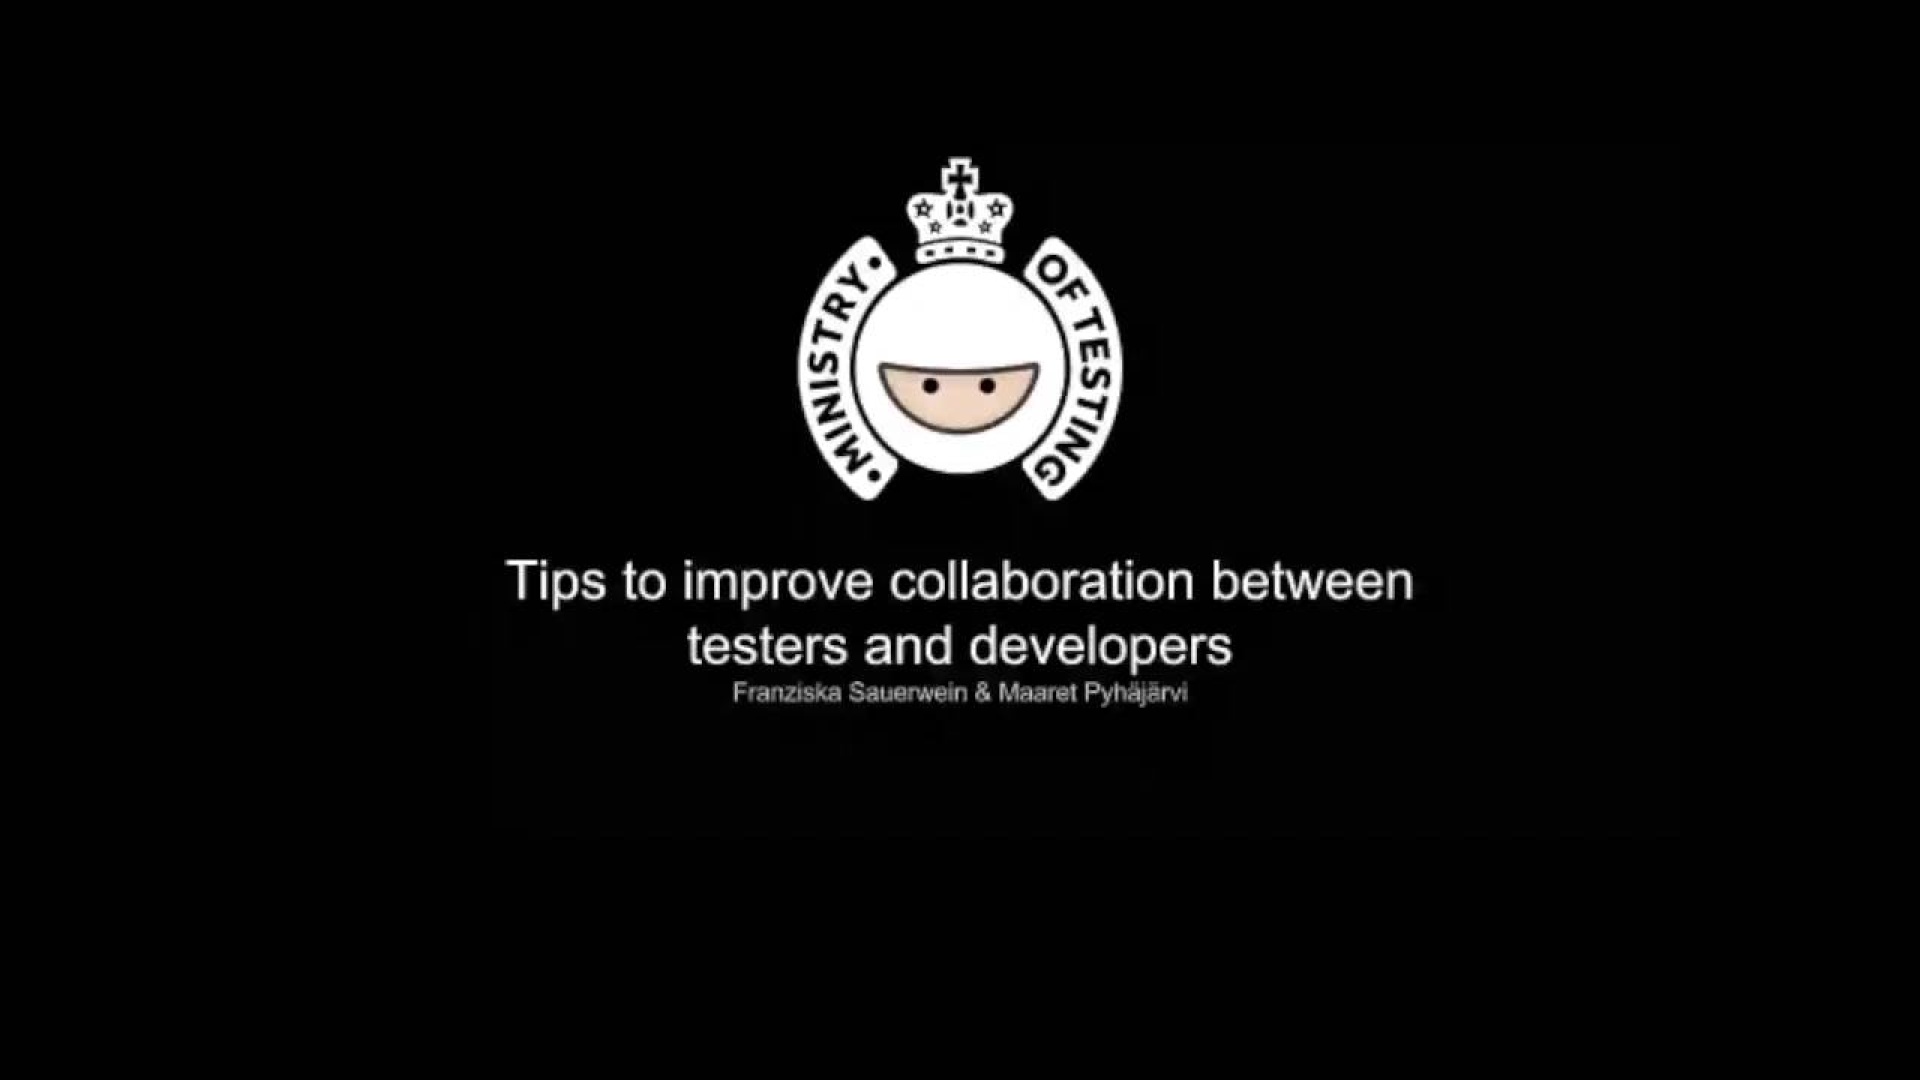 Tips to Improve Collaboration Between Testers and Developers